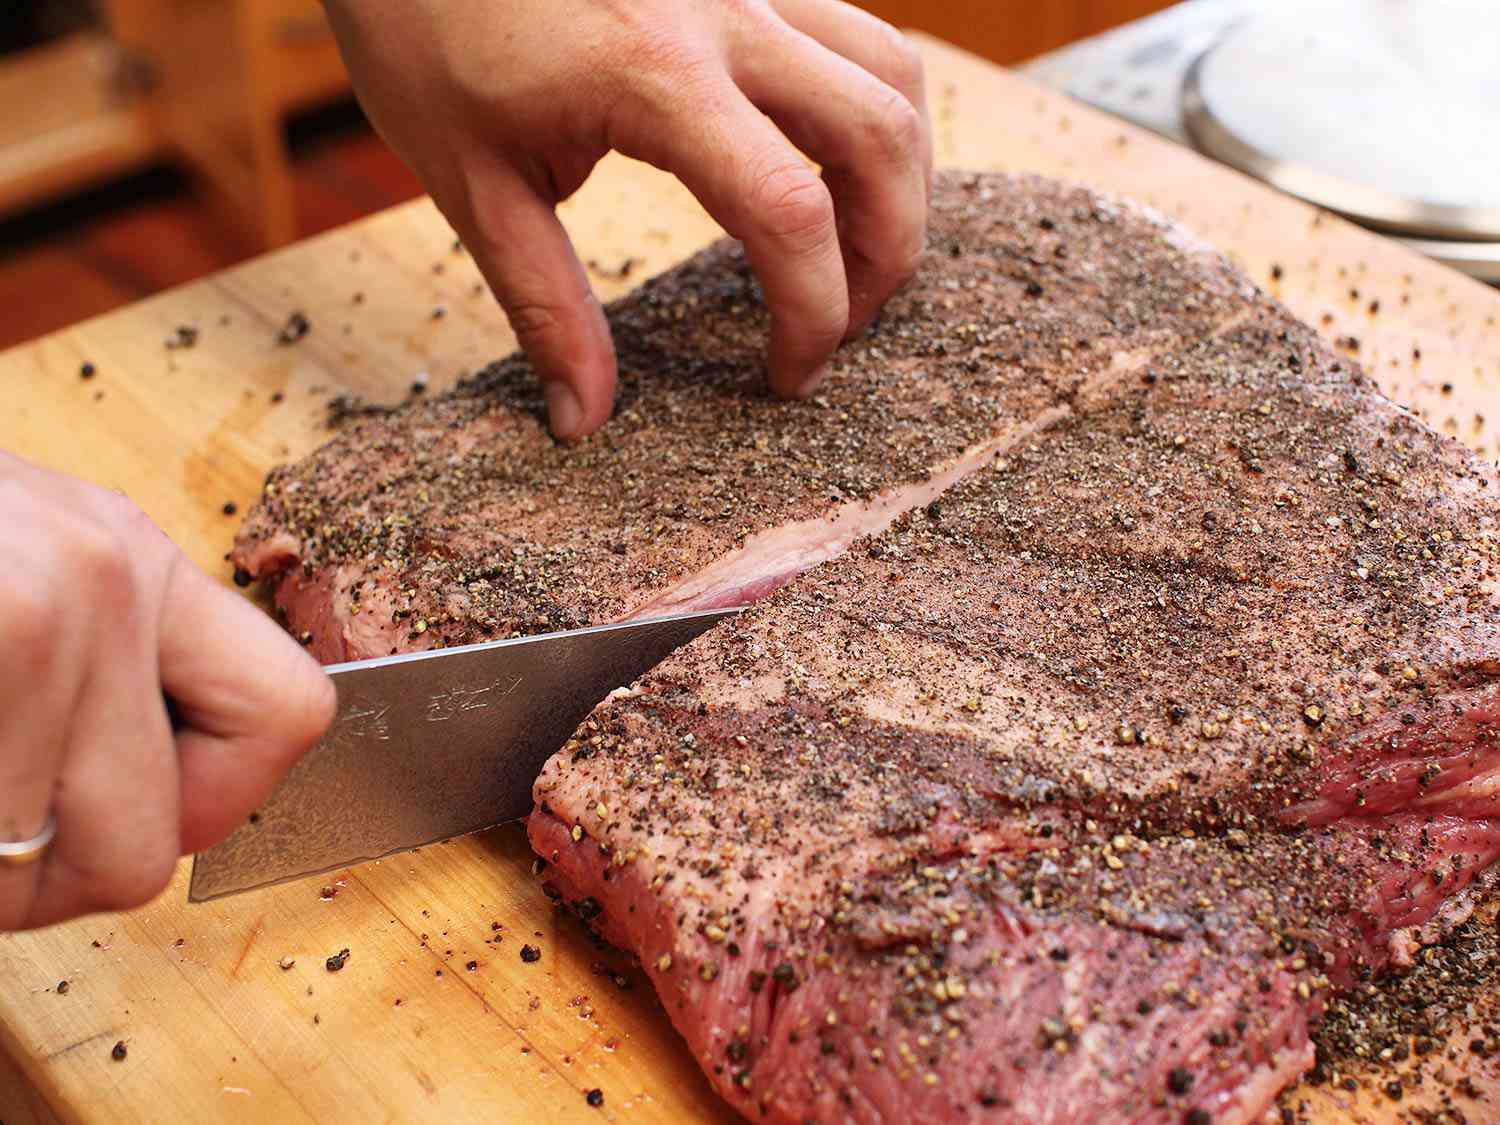 Hands using knife to slice into large piece of peppercorn-crusted raw brisket